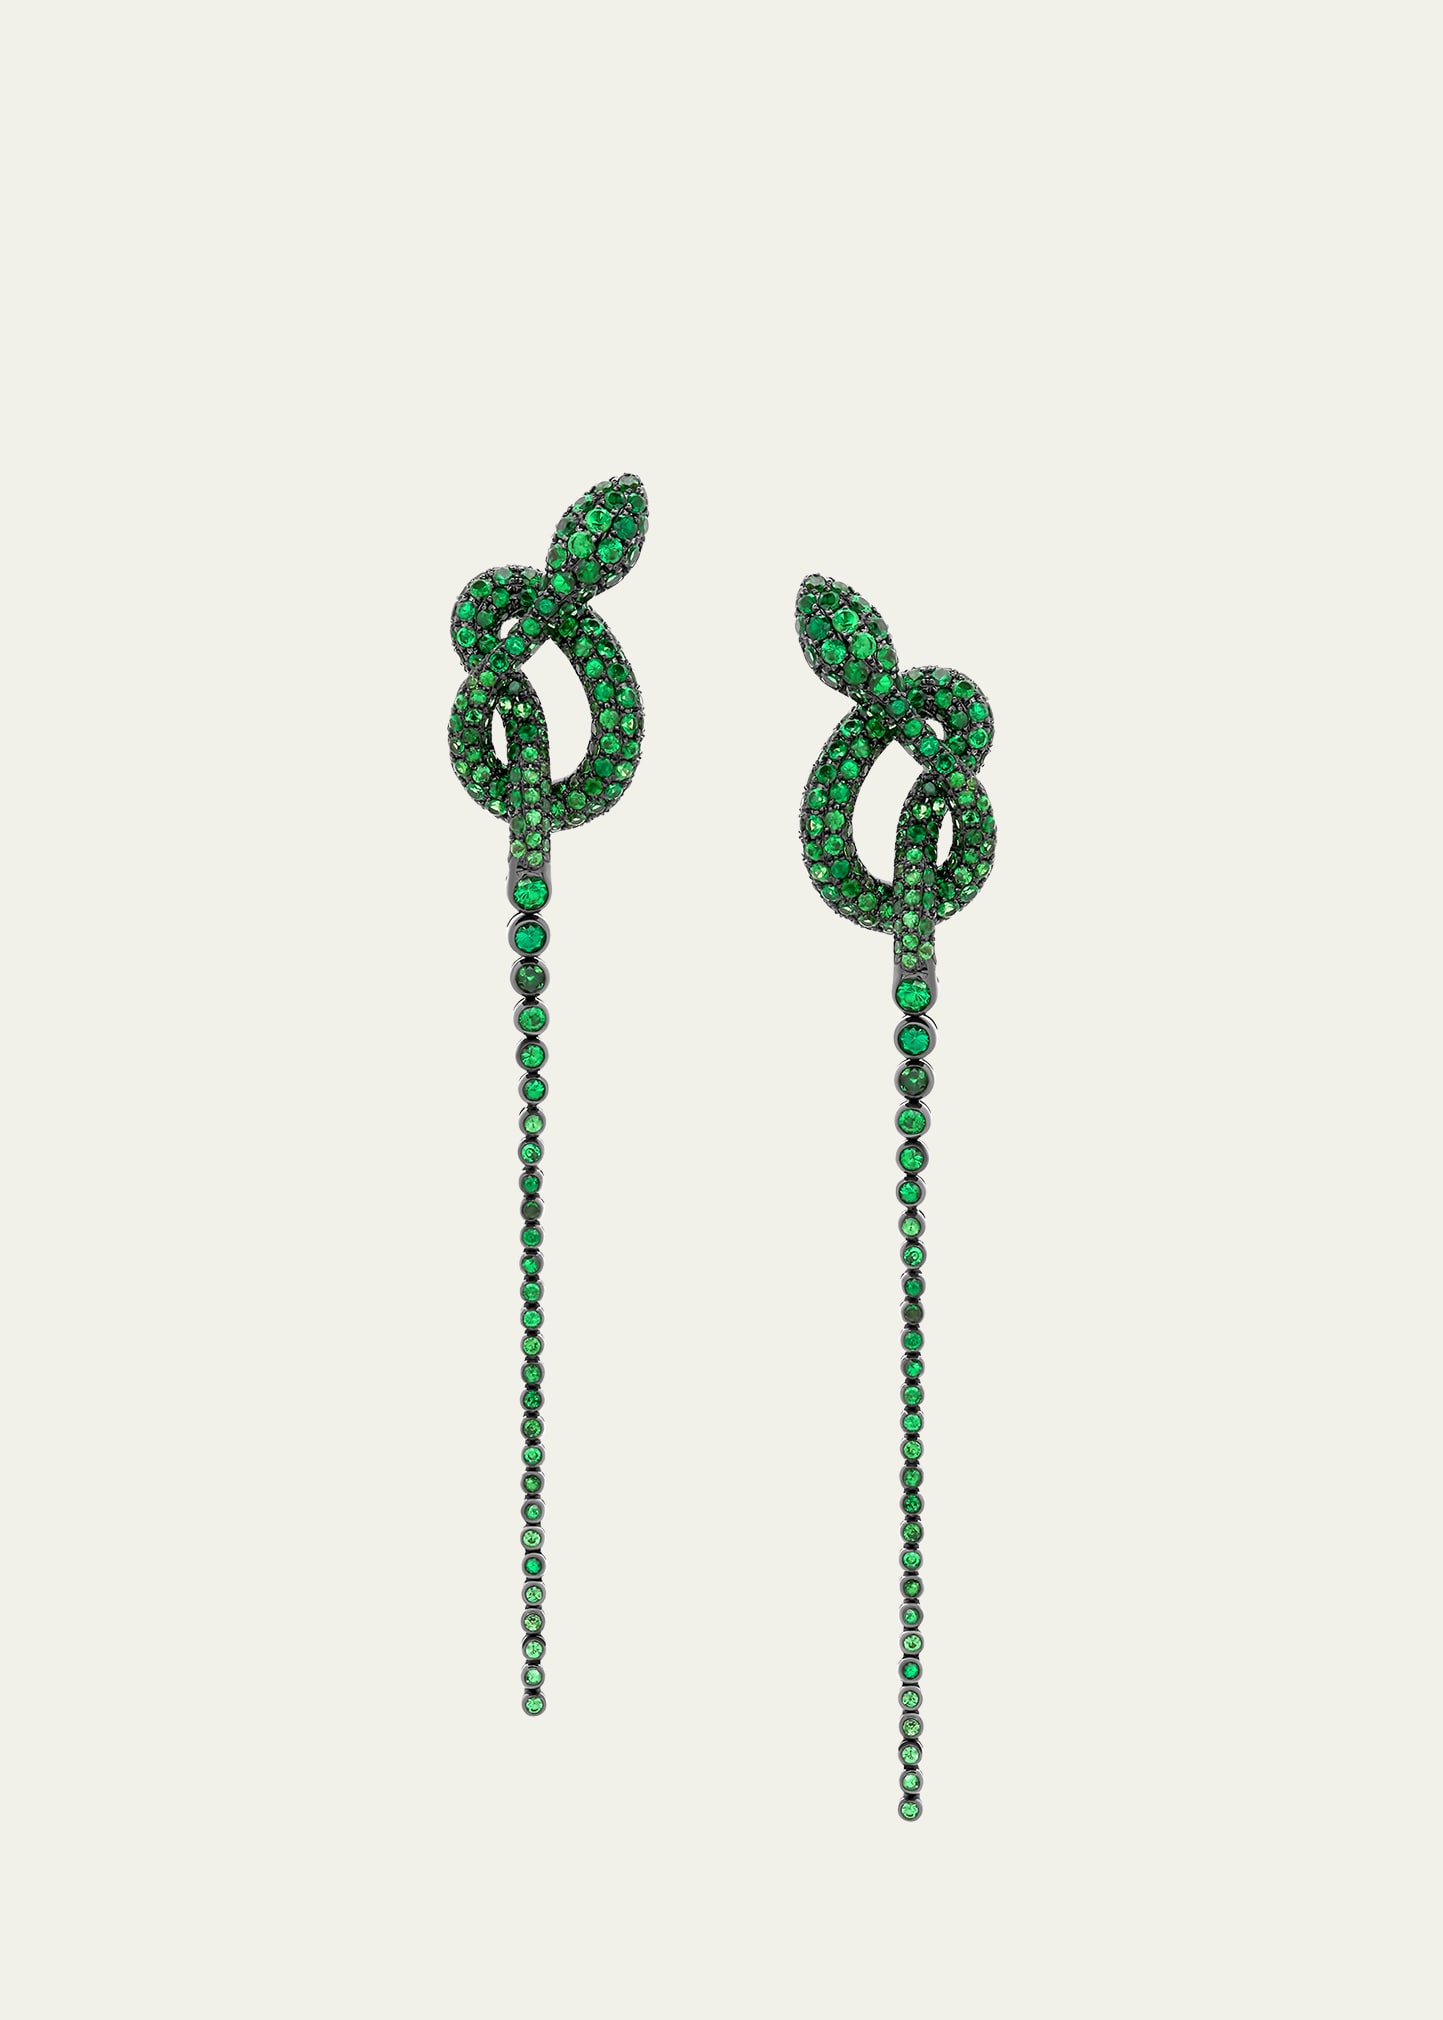 White Gold Tsovorite Earrings from The Snake Collection